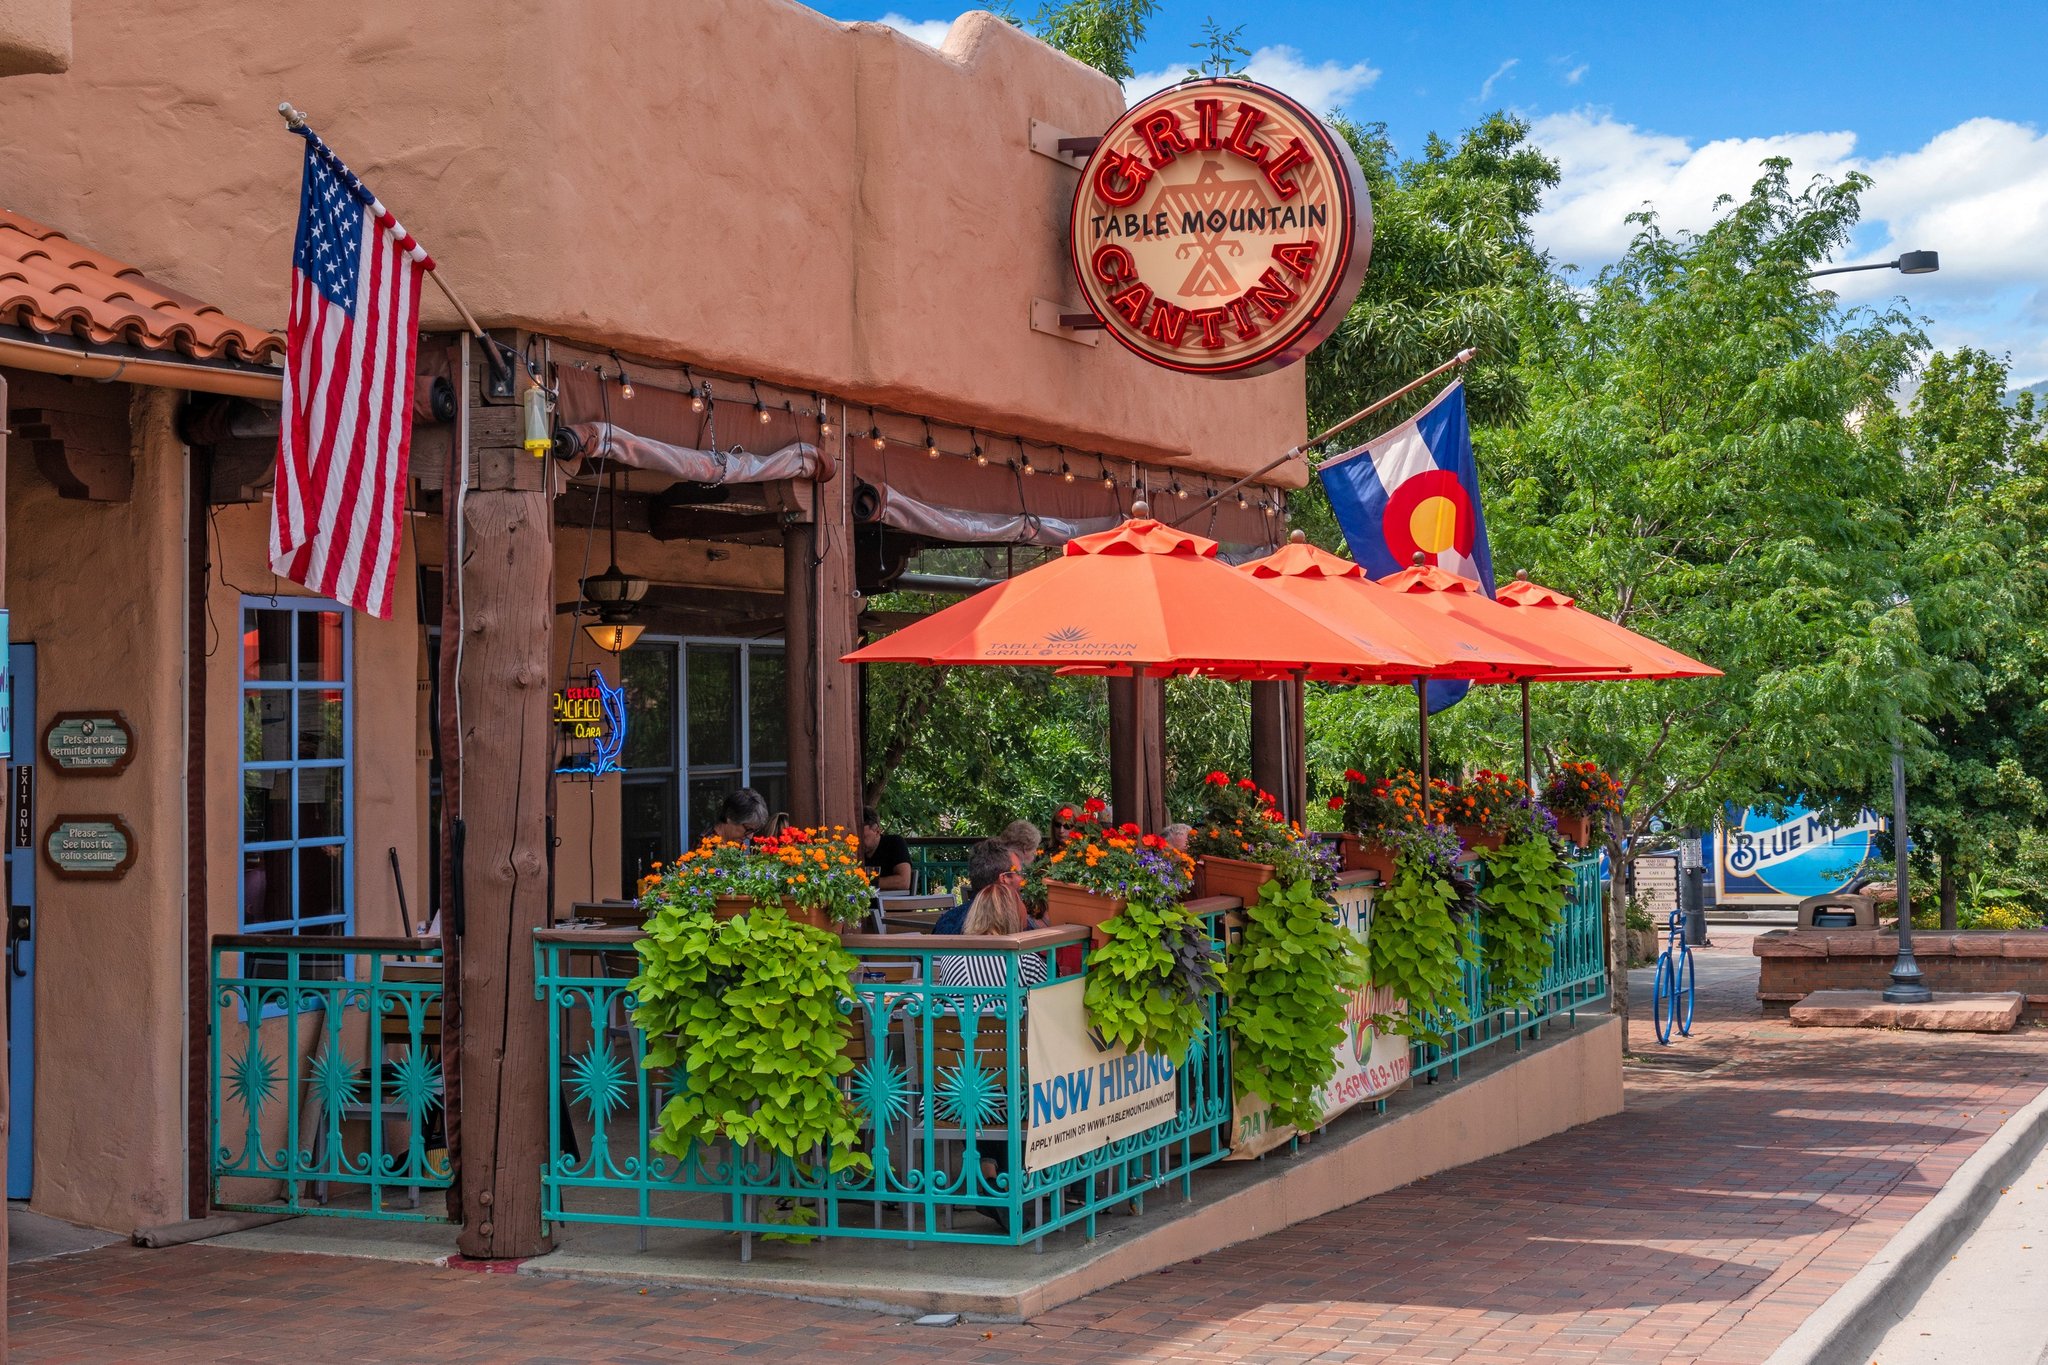 Table Mountain Grill & Cantina: what a great spot to relax on the patio on a Summer's day